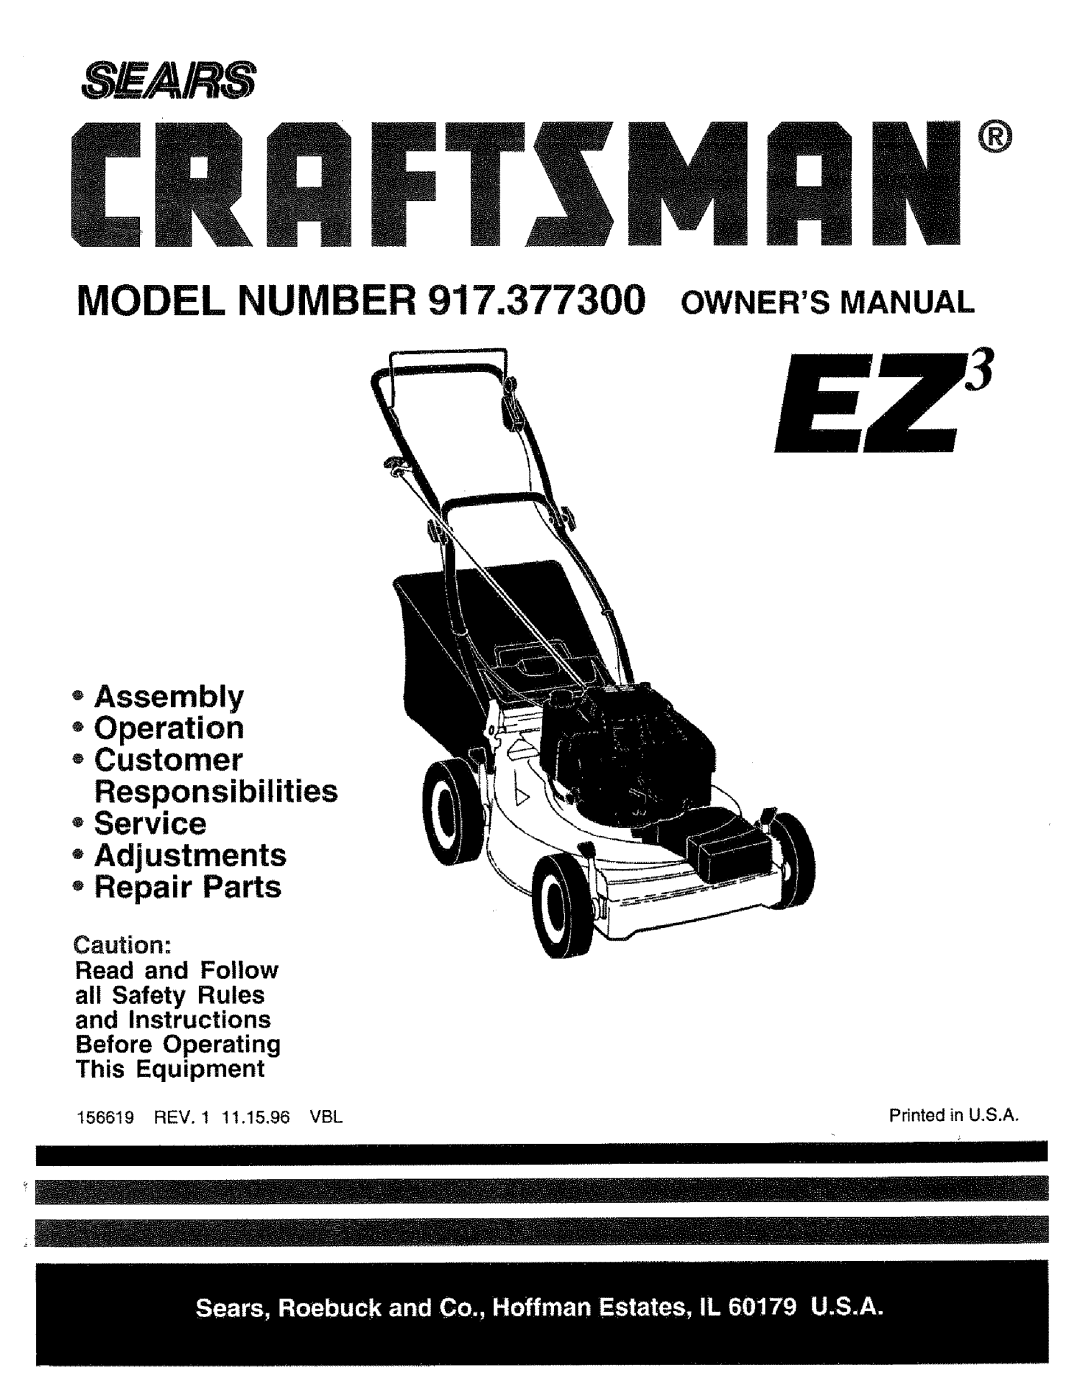 Craftsman manual MODEL NUMBER 917.377300 OWNERSMANUAL, Assembly Operation Customer Responsibilities, Airs 